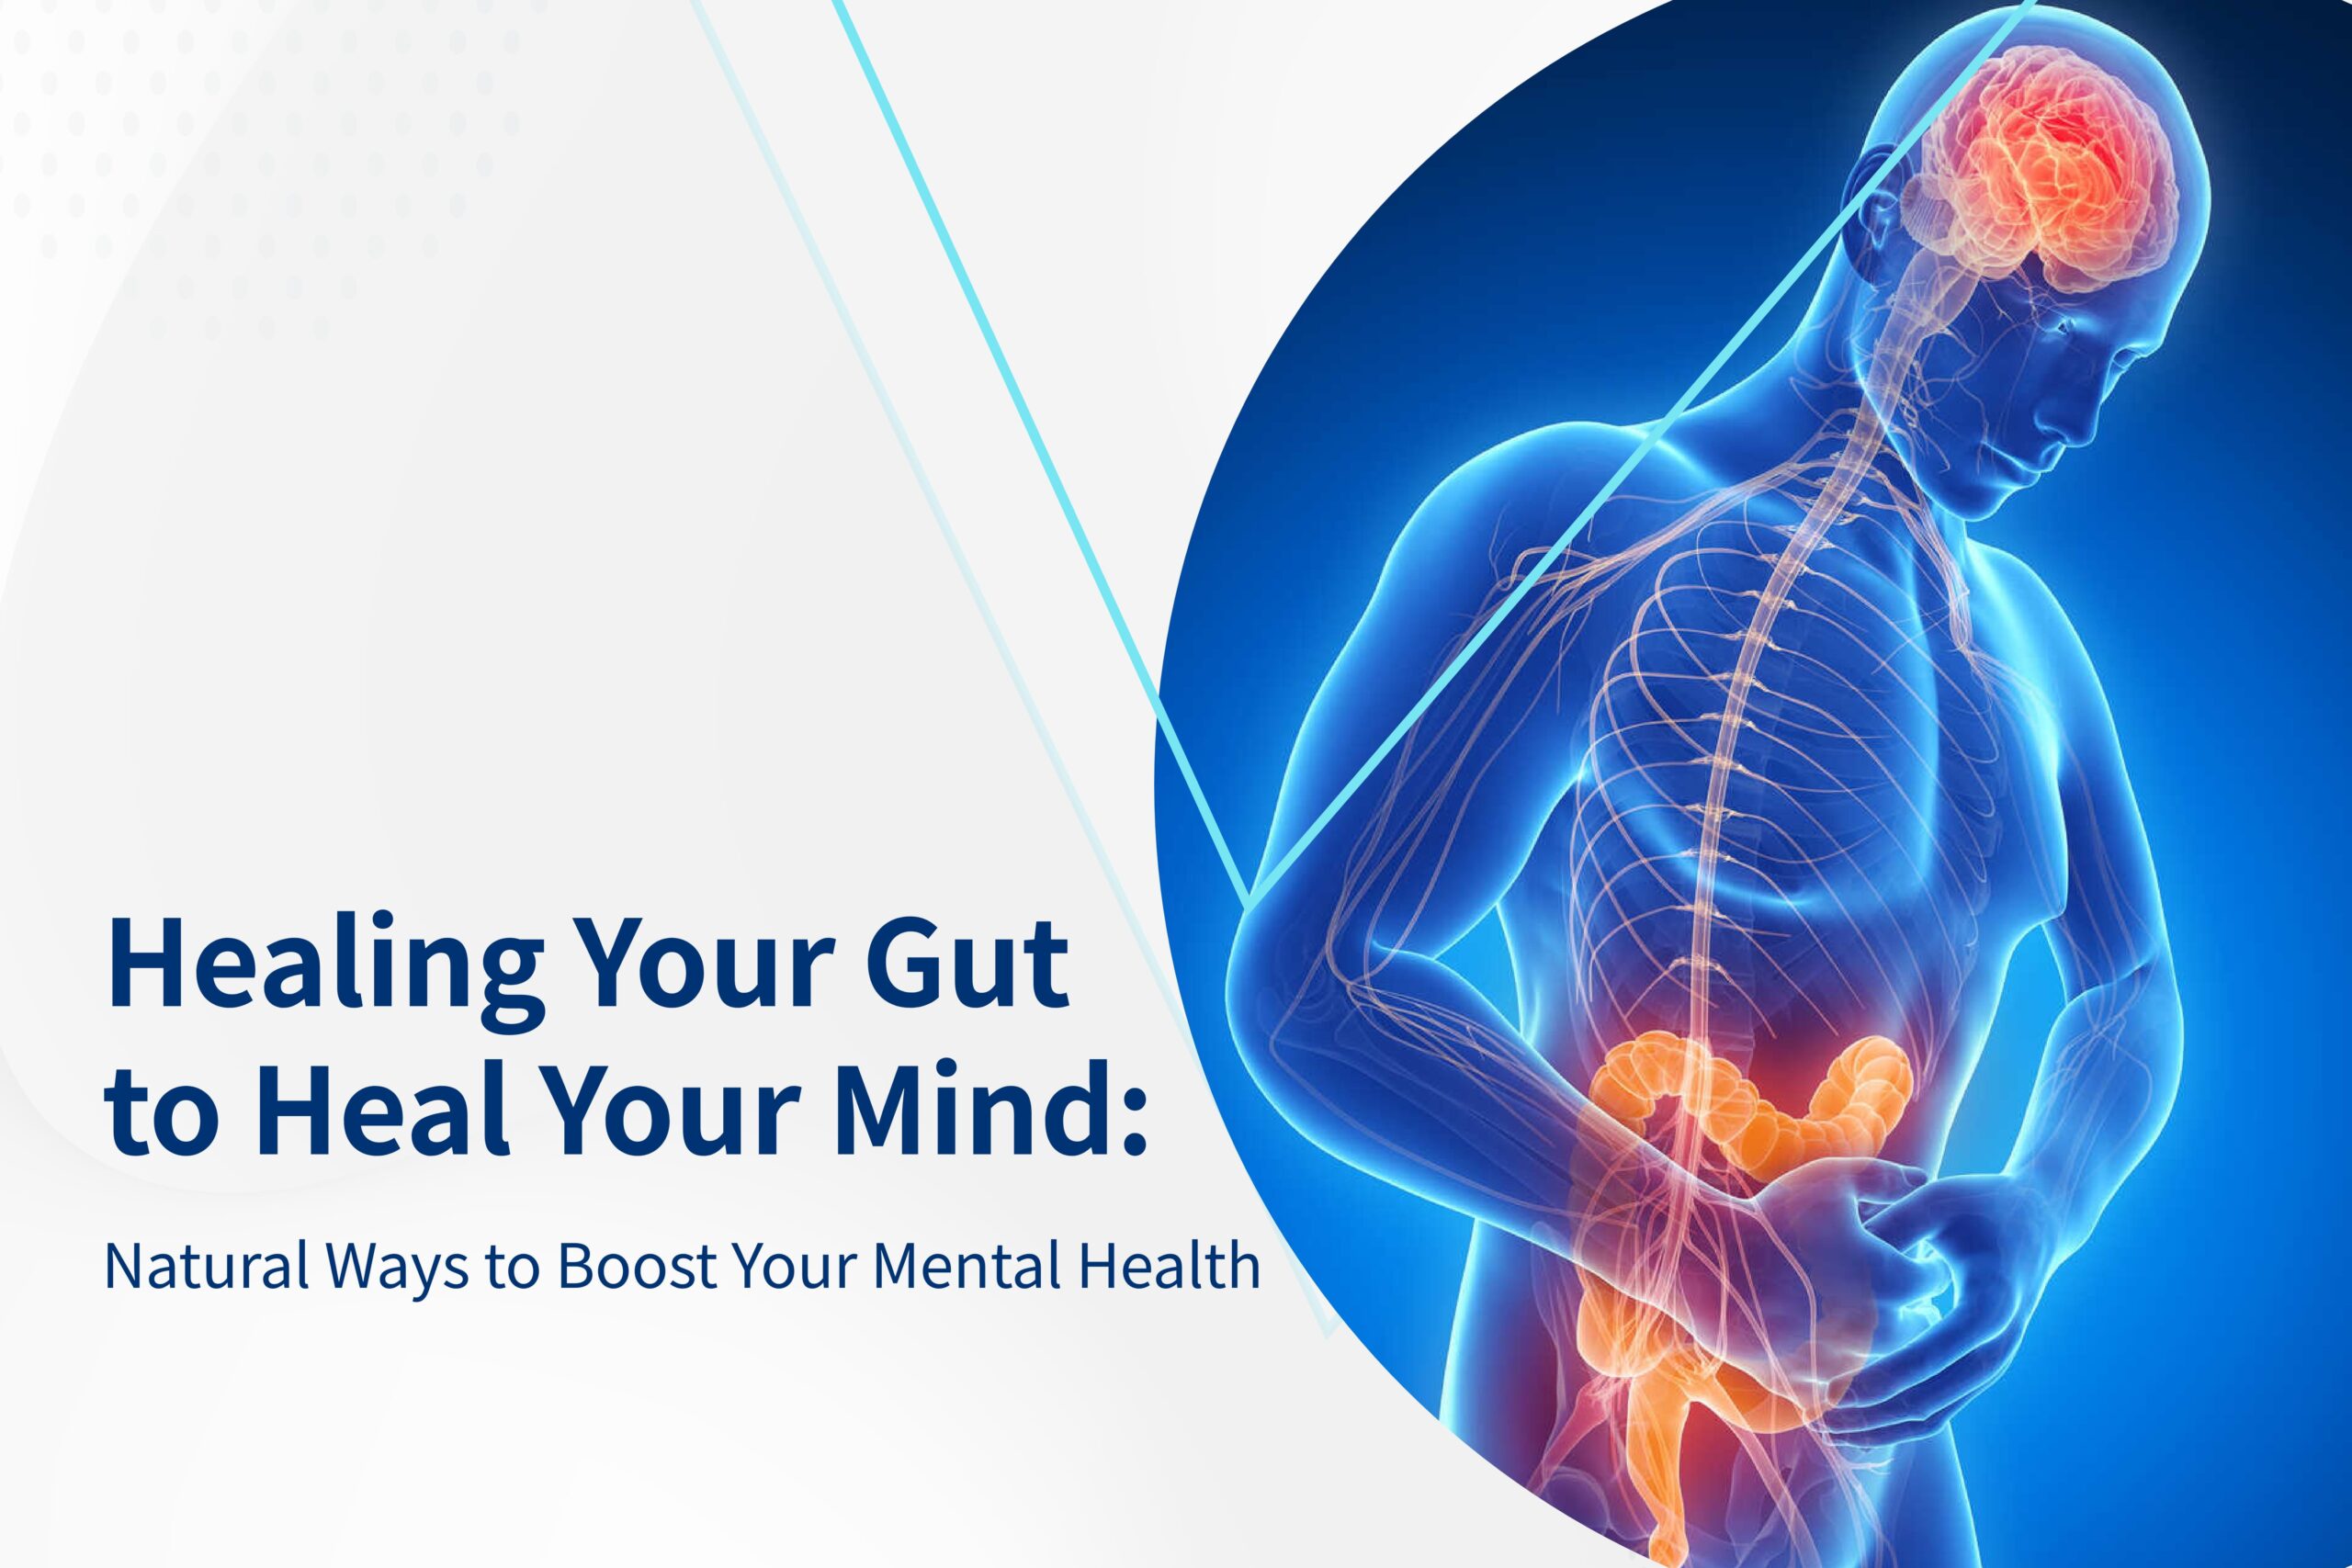 Healing Your Gut to Heal Your Mind: Natural Ways to Boost Your Mental Health